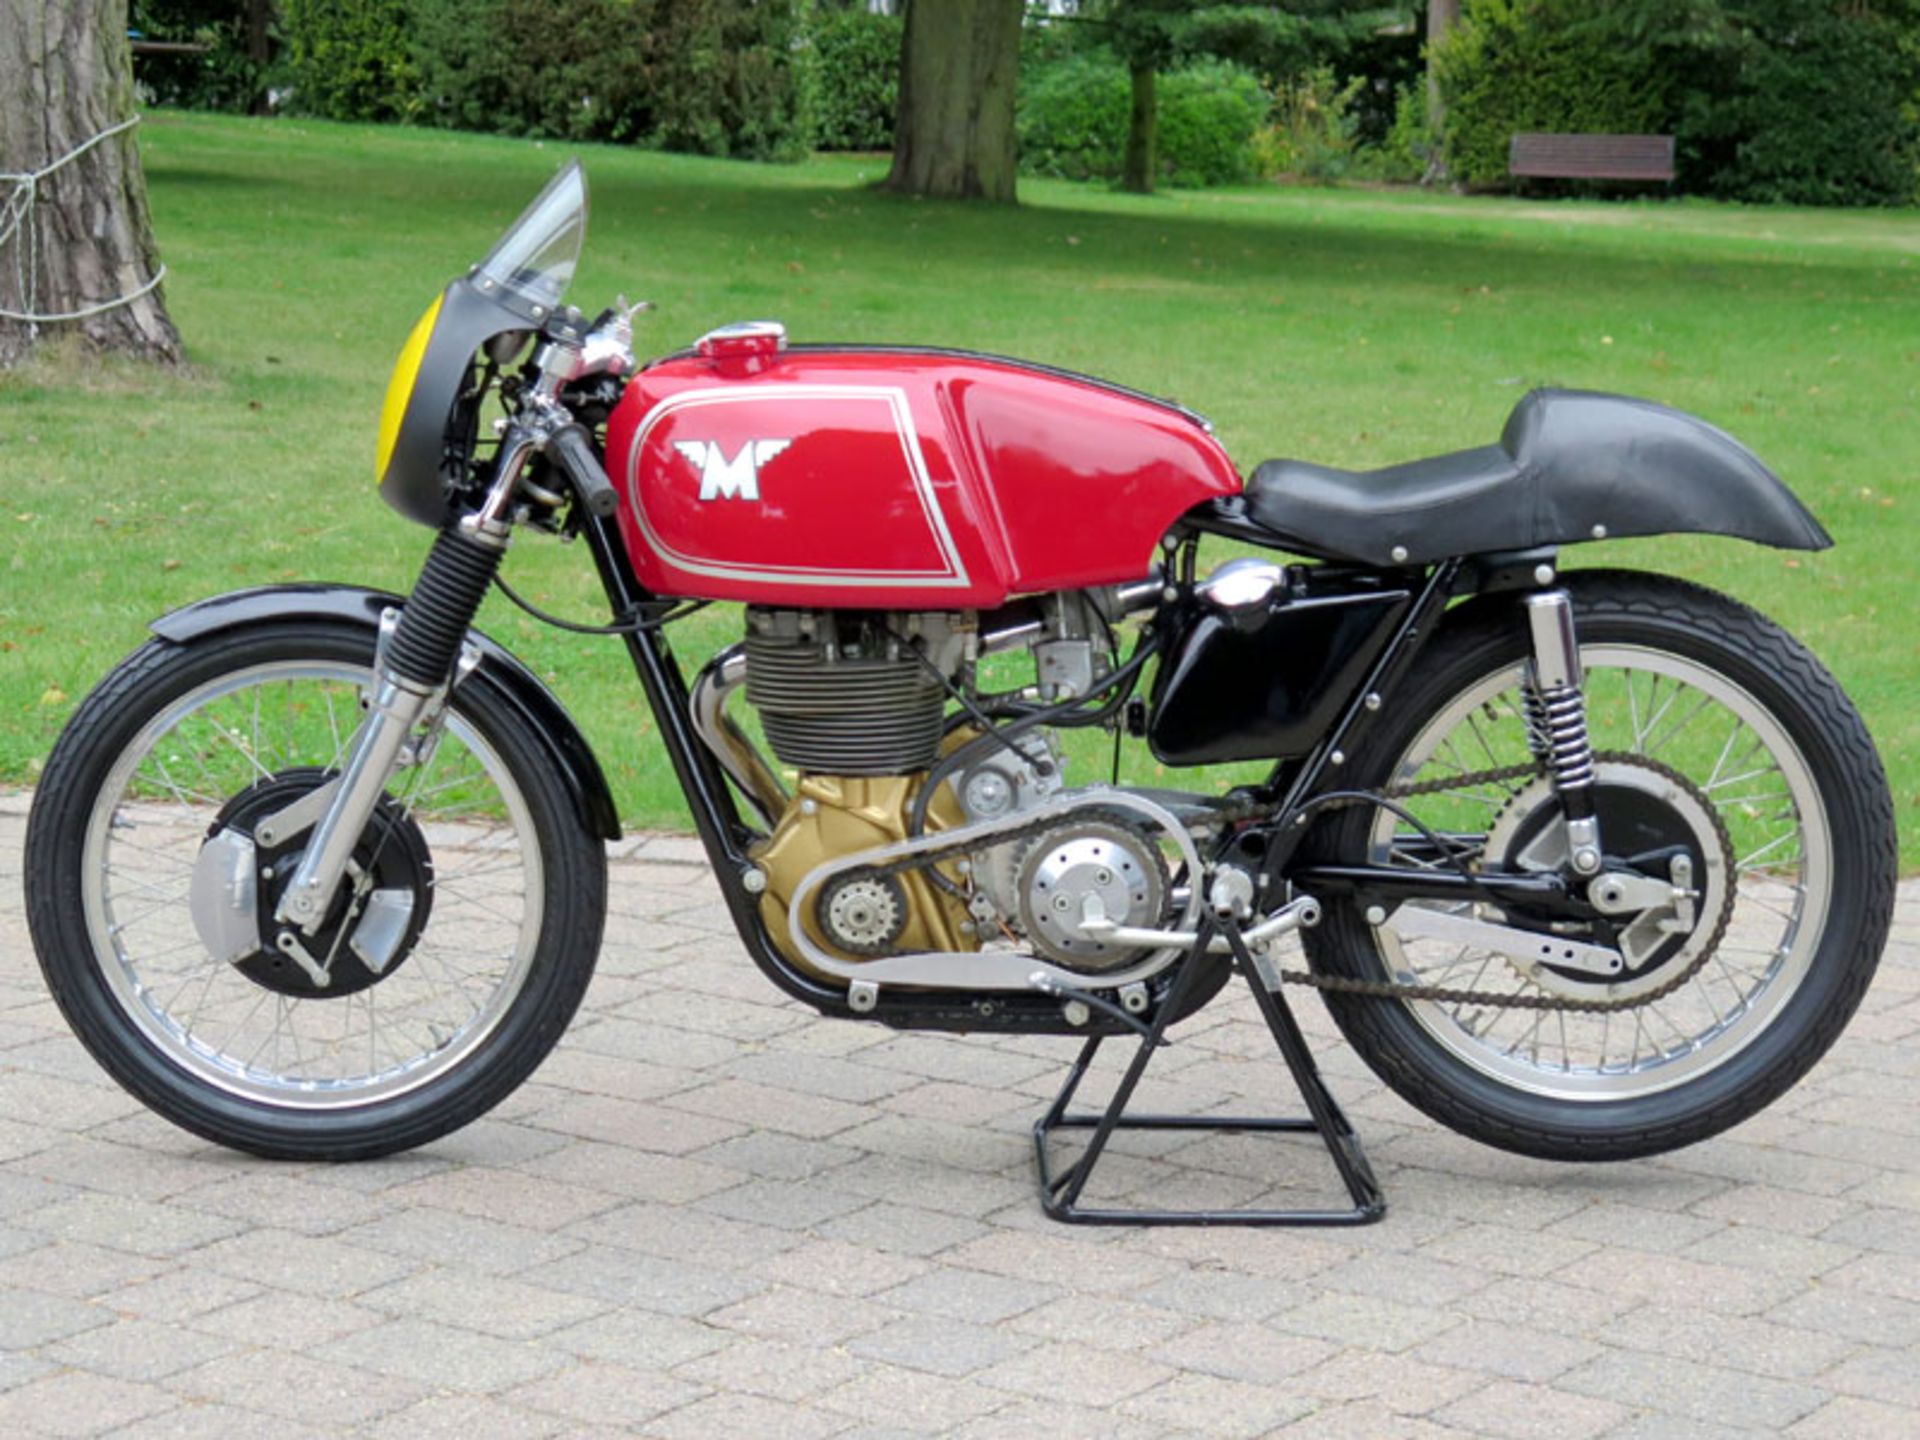 1962 Matchless G50 - Image 2 of 6